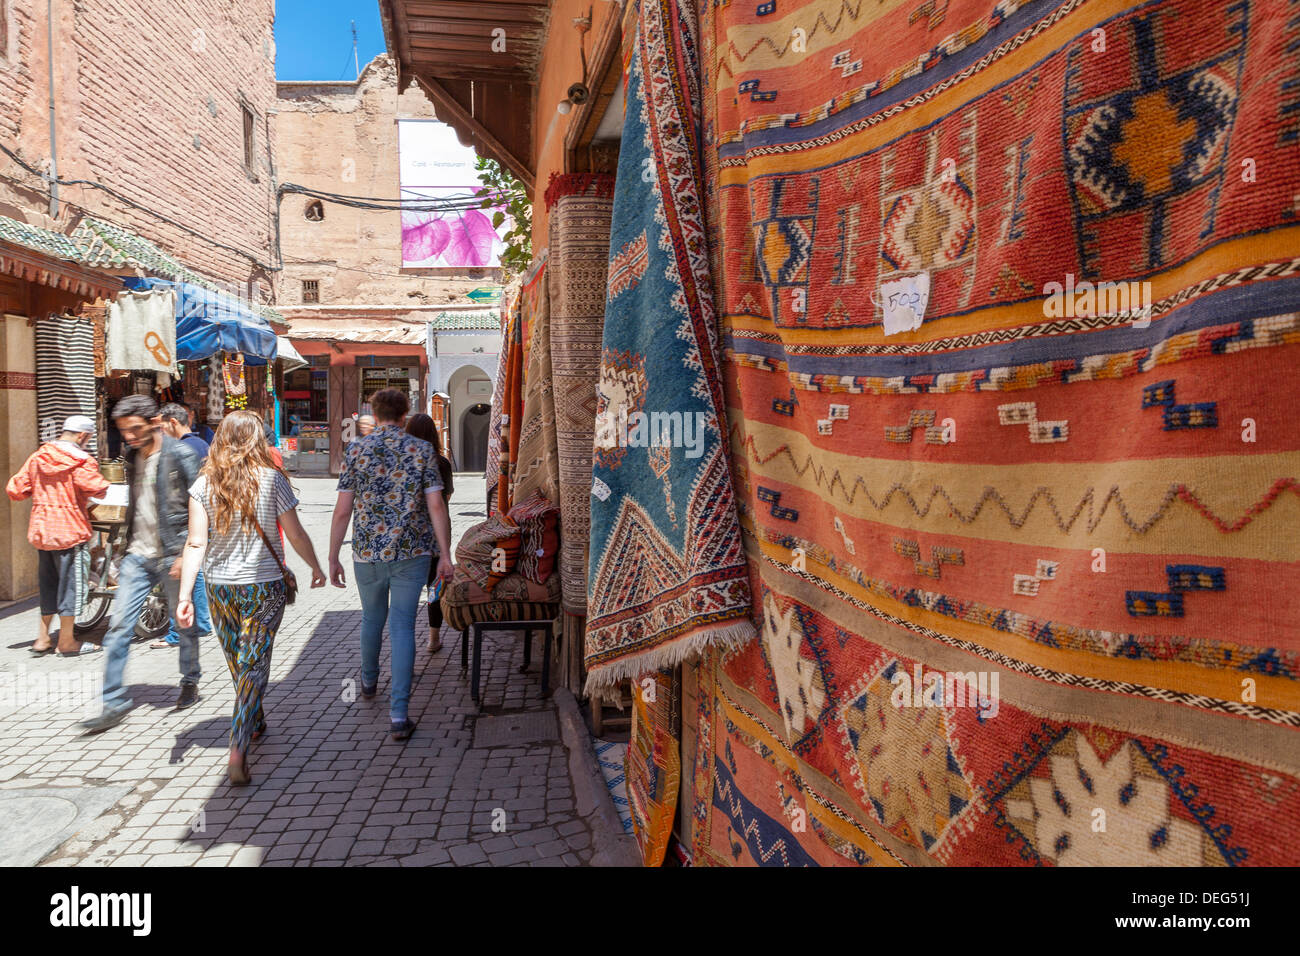 Tourists and locals walking alongside traditional rugs in the Medina's souks, Marrakech, Morocco, North Africa, Africa Stock Photo